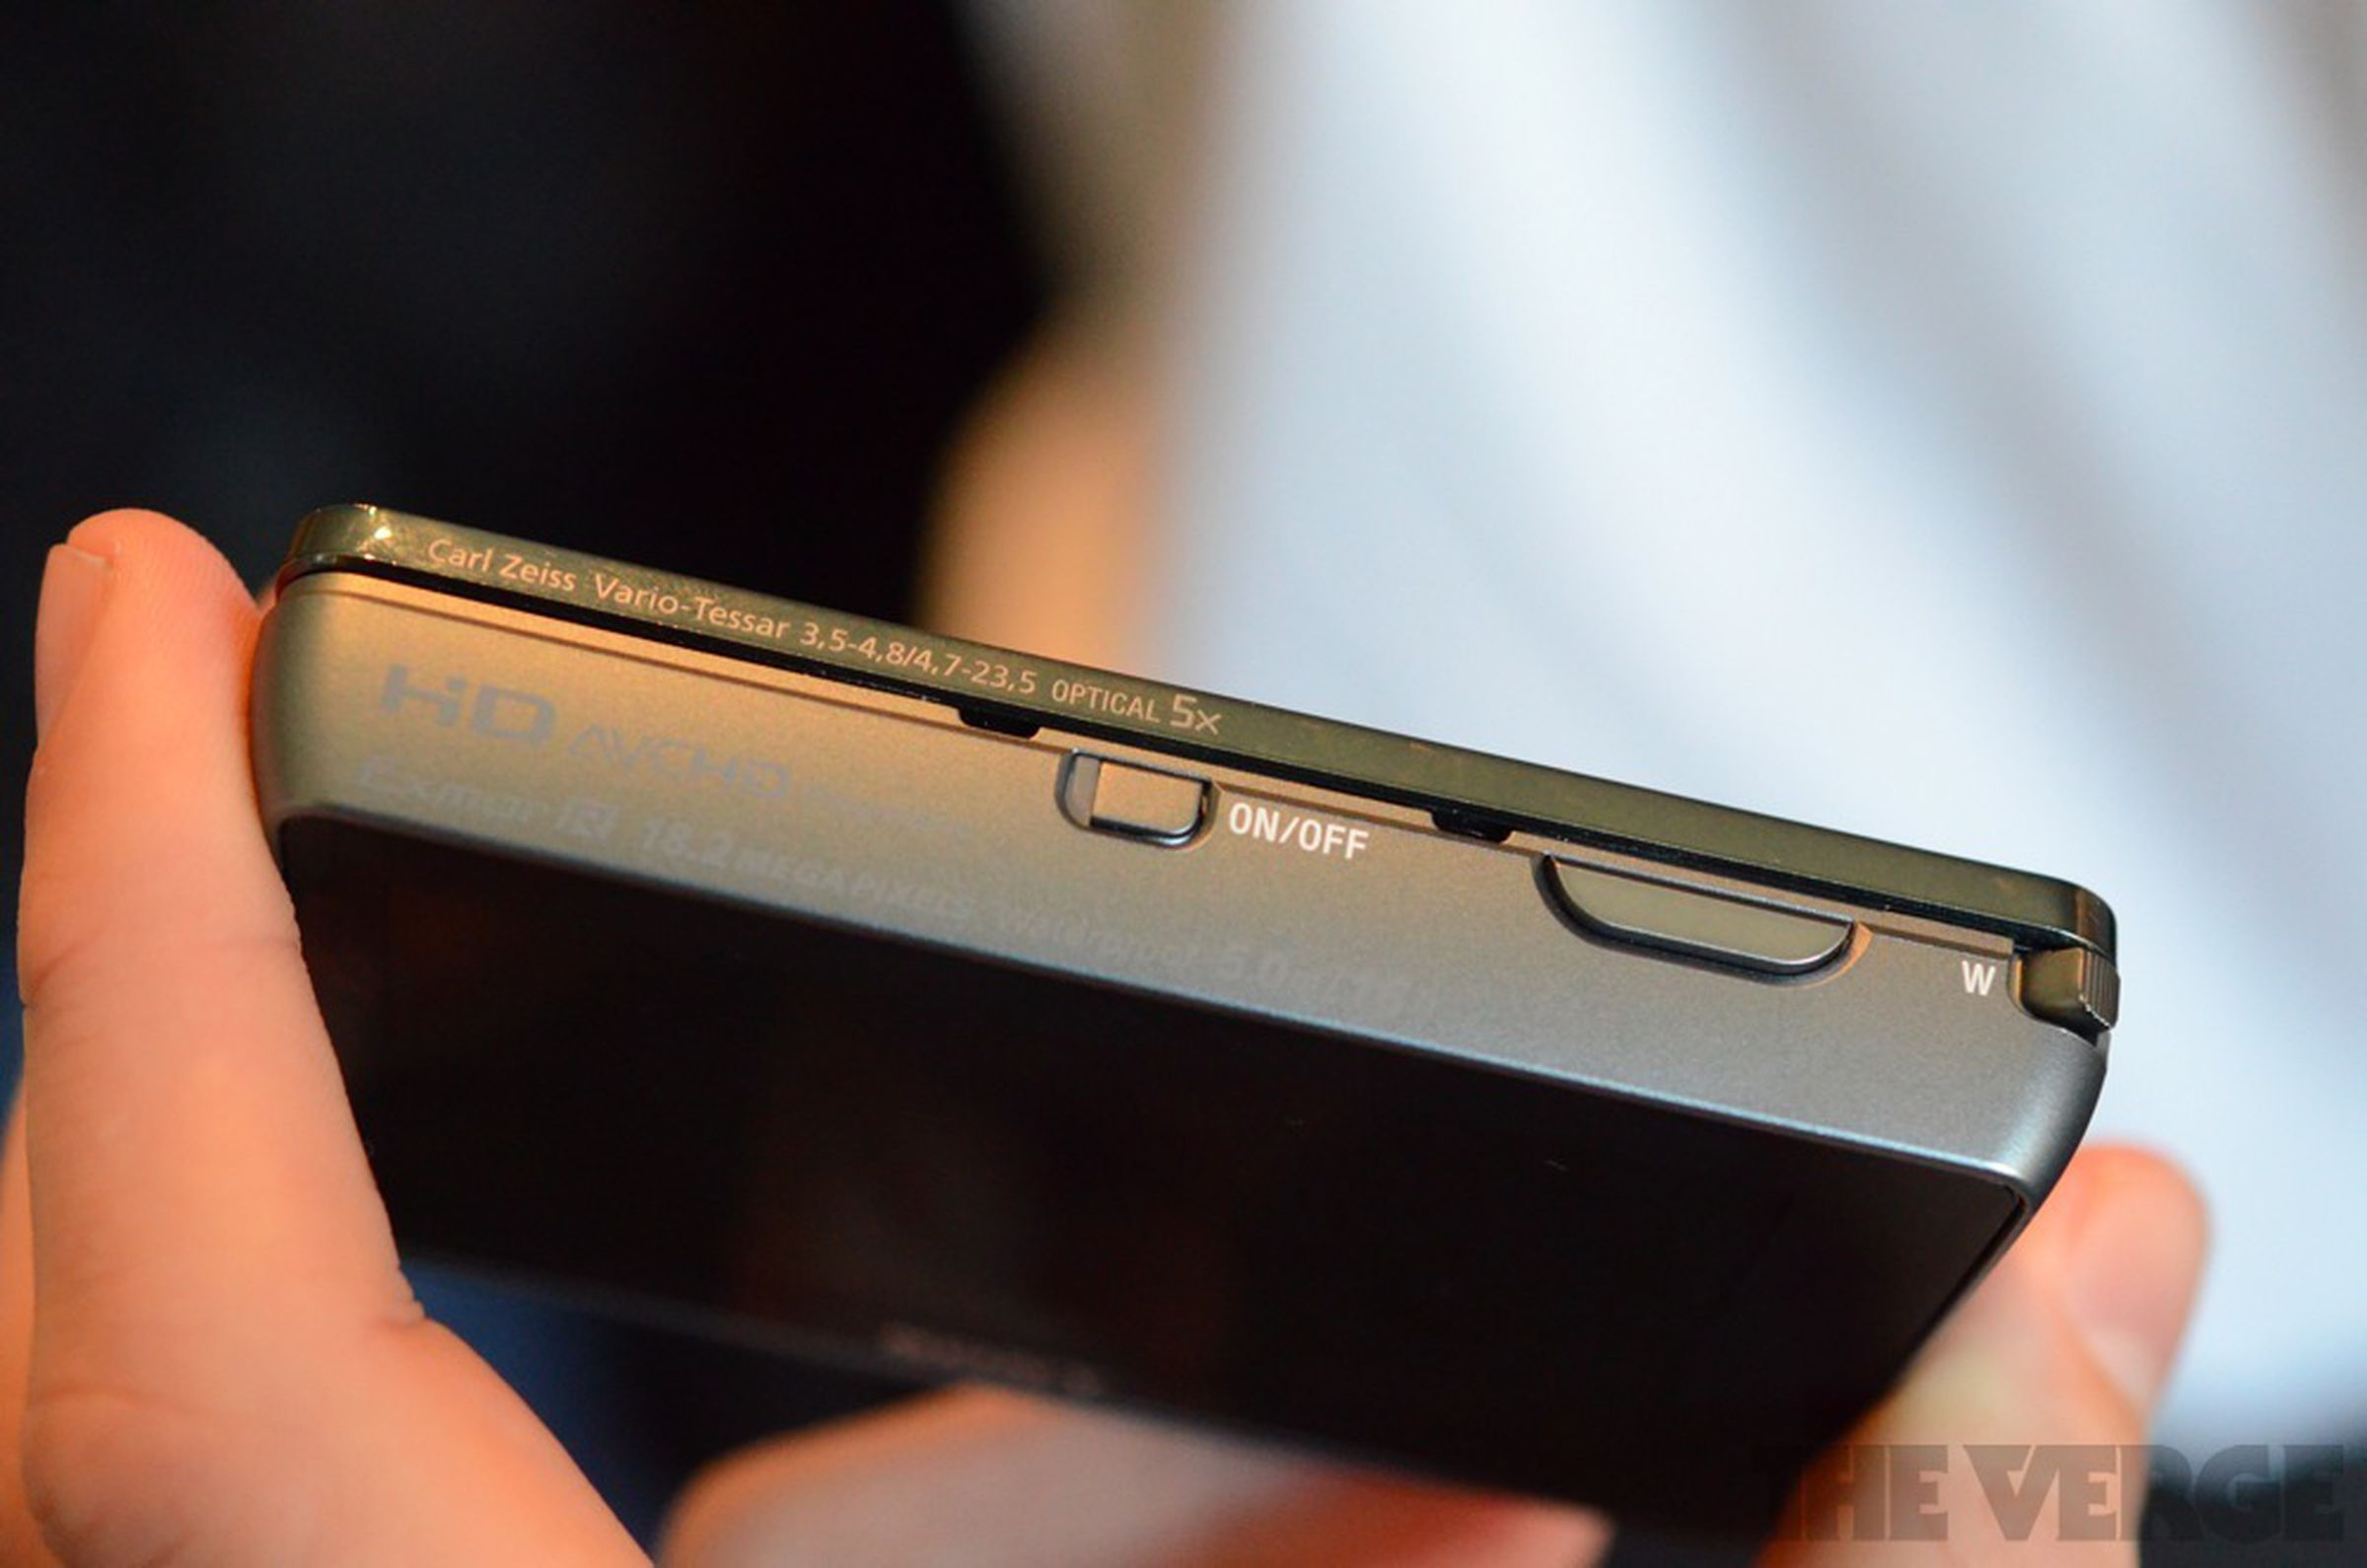 Sony Cyber-shot WX50, WX70, and TX200V hands-on pictures